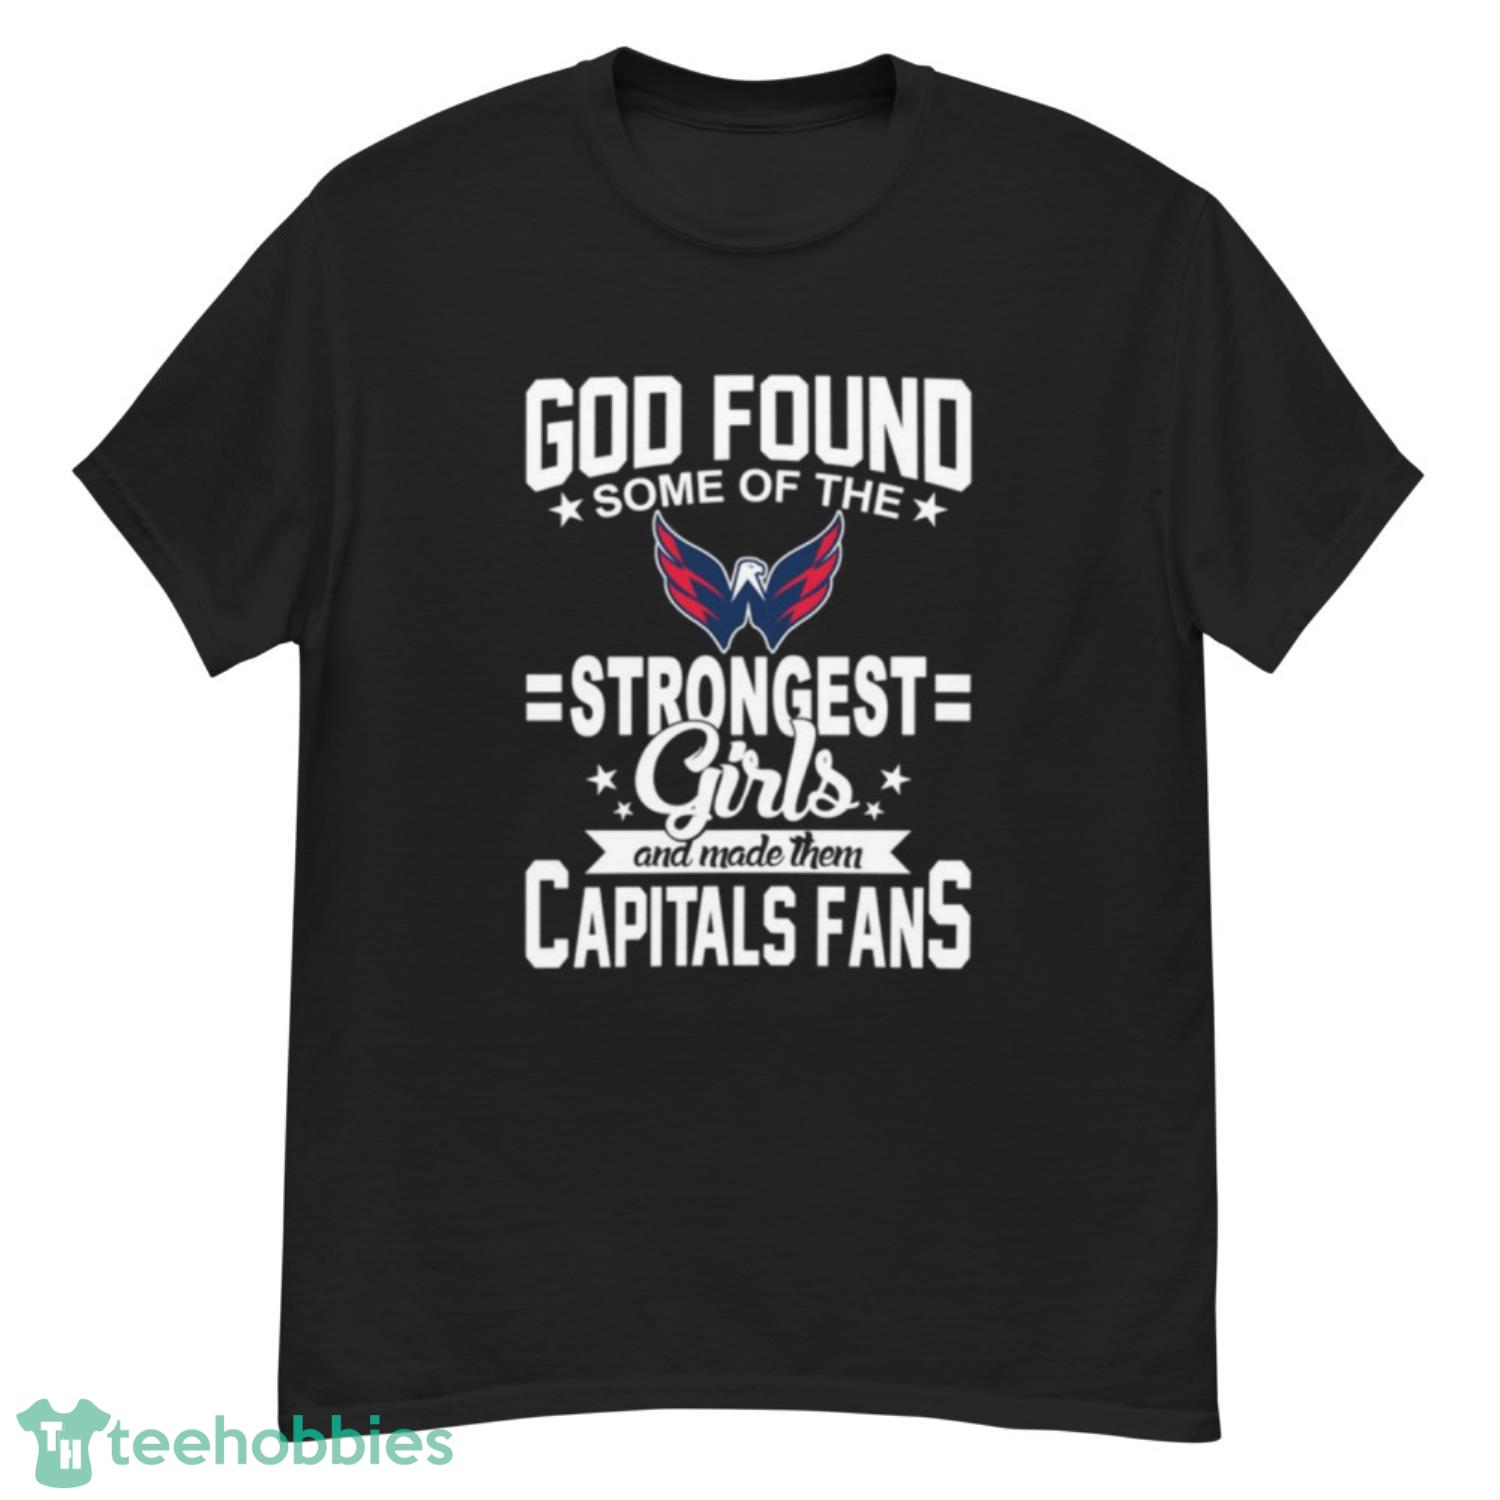 Washington Capitals NHL Football God Found Some Of The Strongest Girls Adoring Fans T Shirt - G500 Men’s Classic T-Shirt